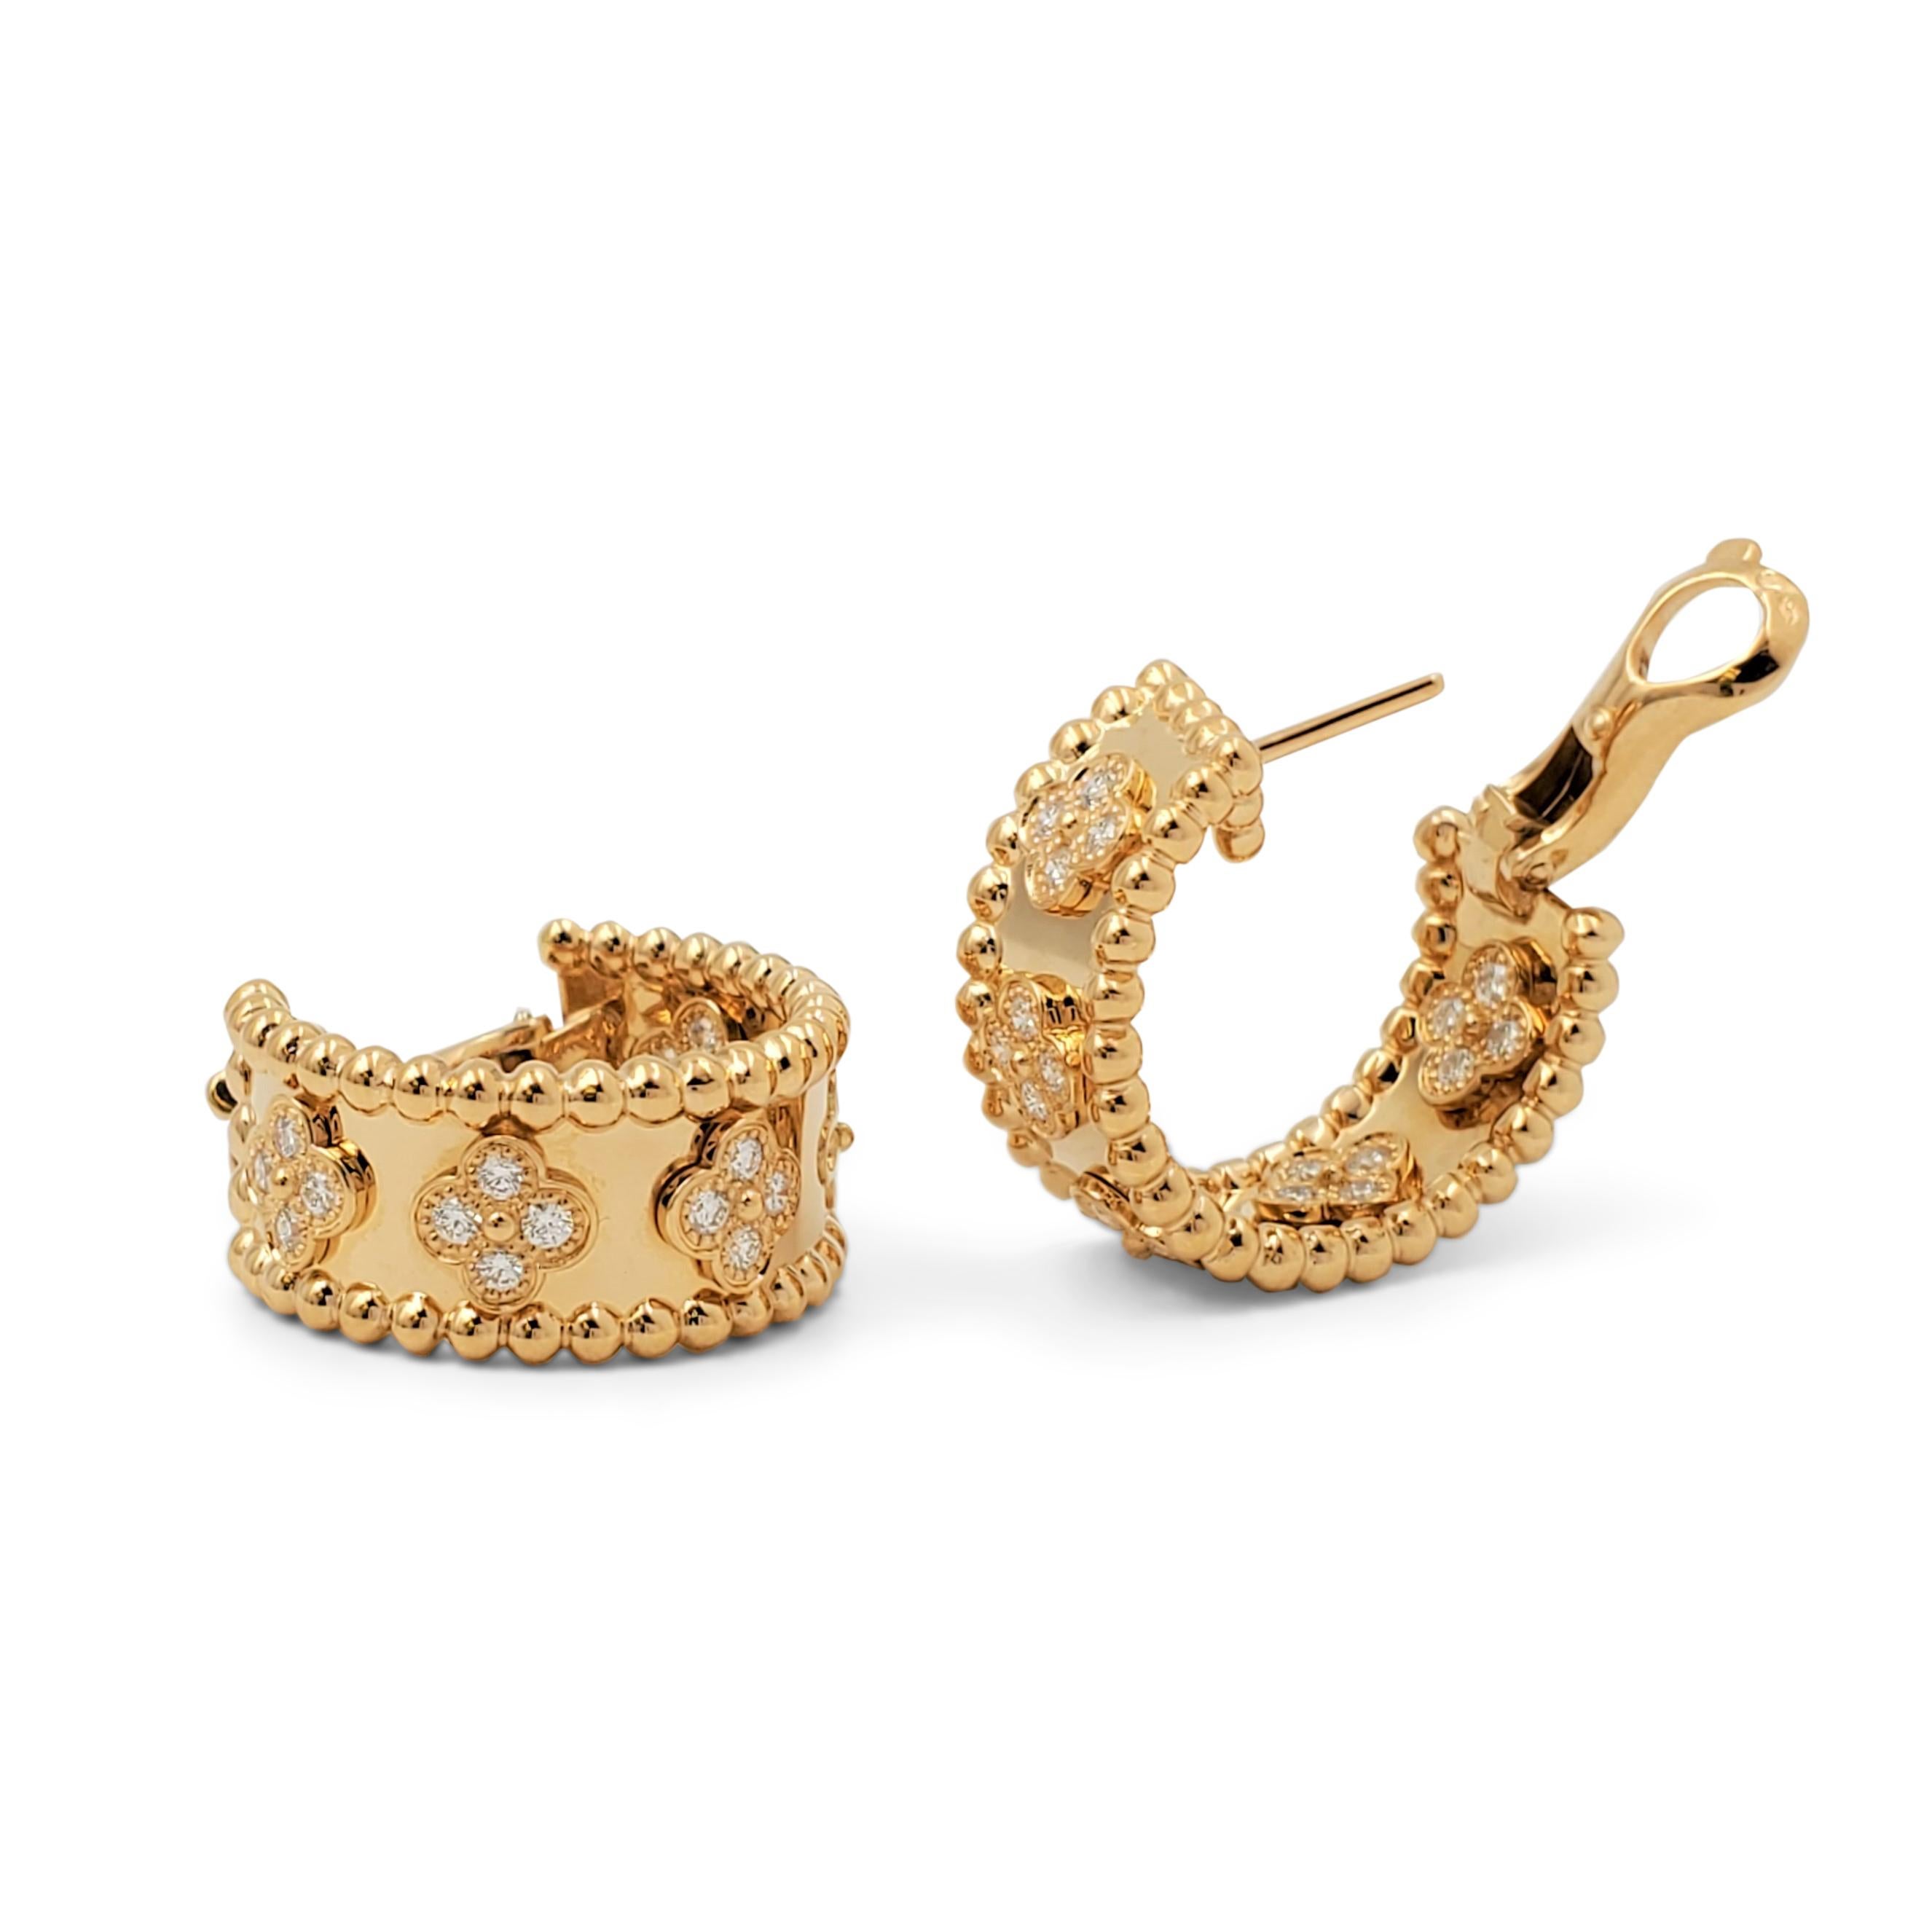 Round Cut Van Cleef & Arpels Perlée Yellow Gold and Diamond Earrings